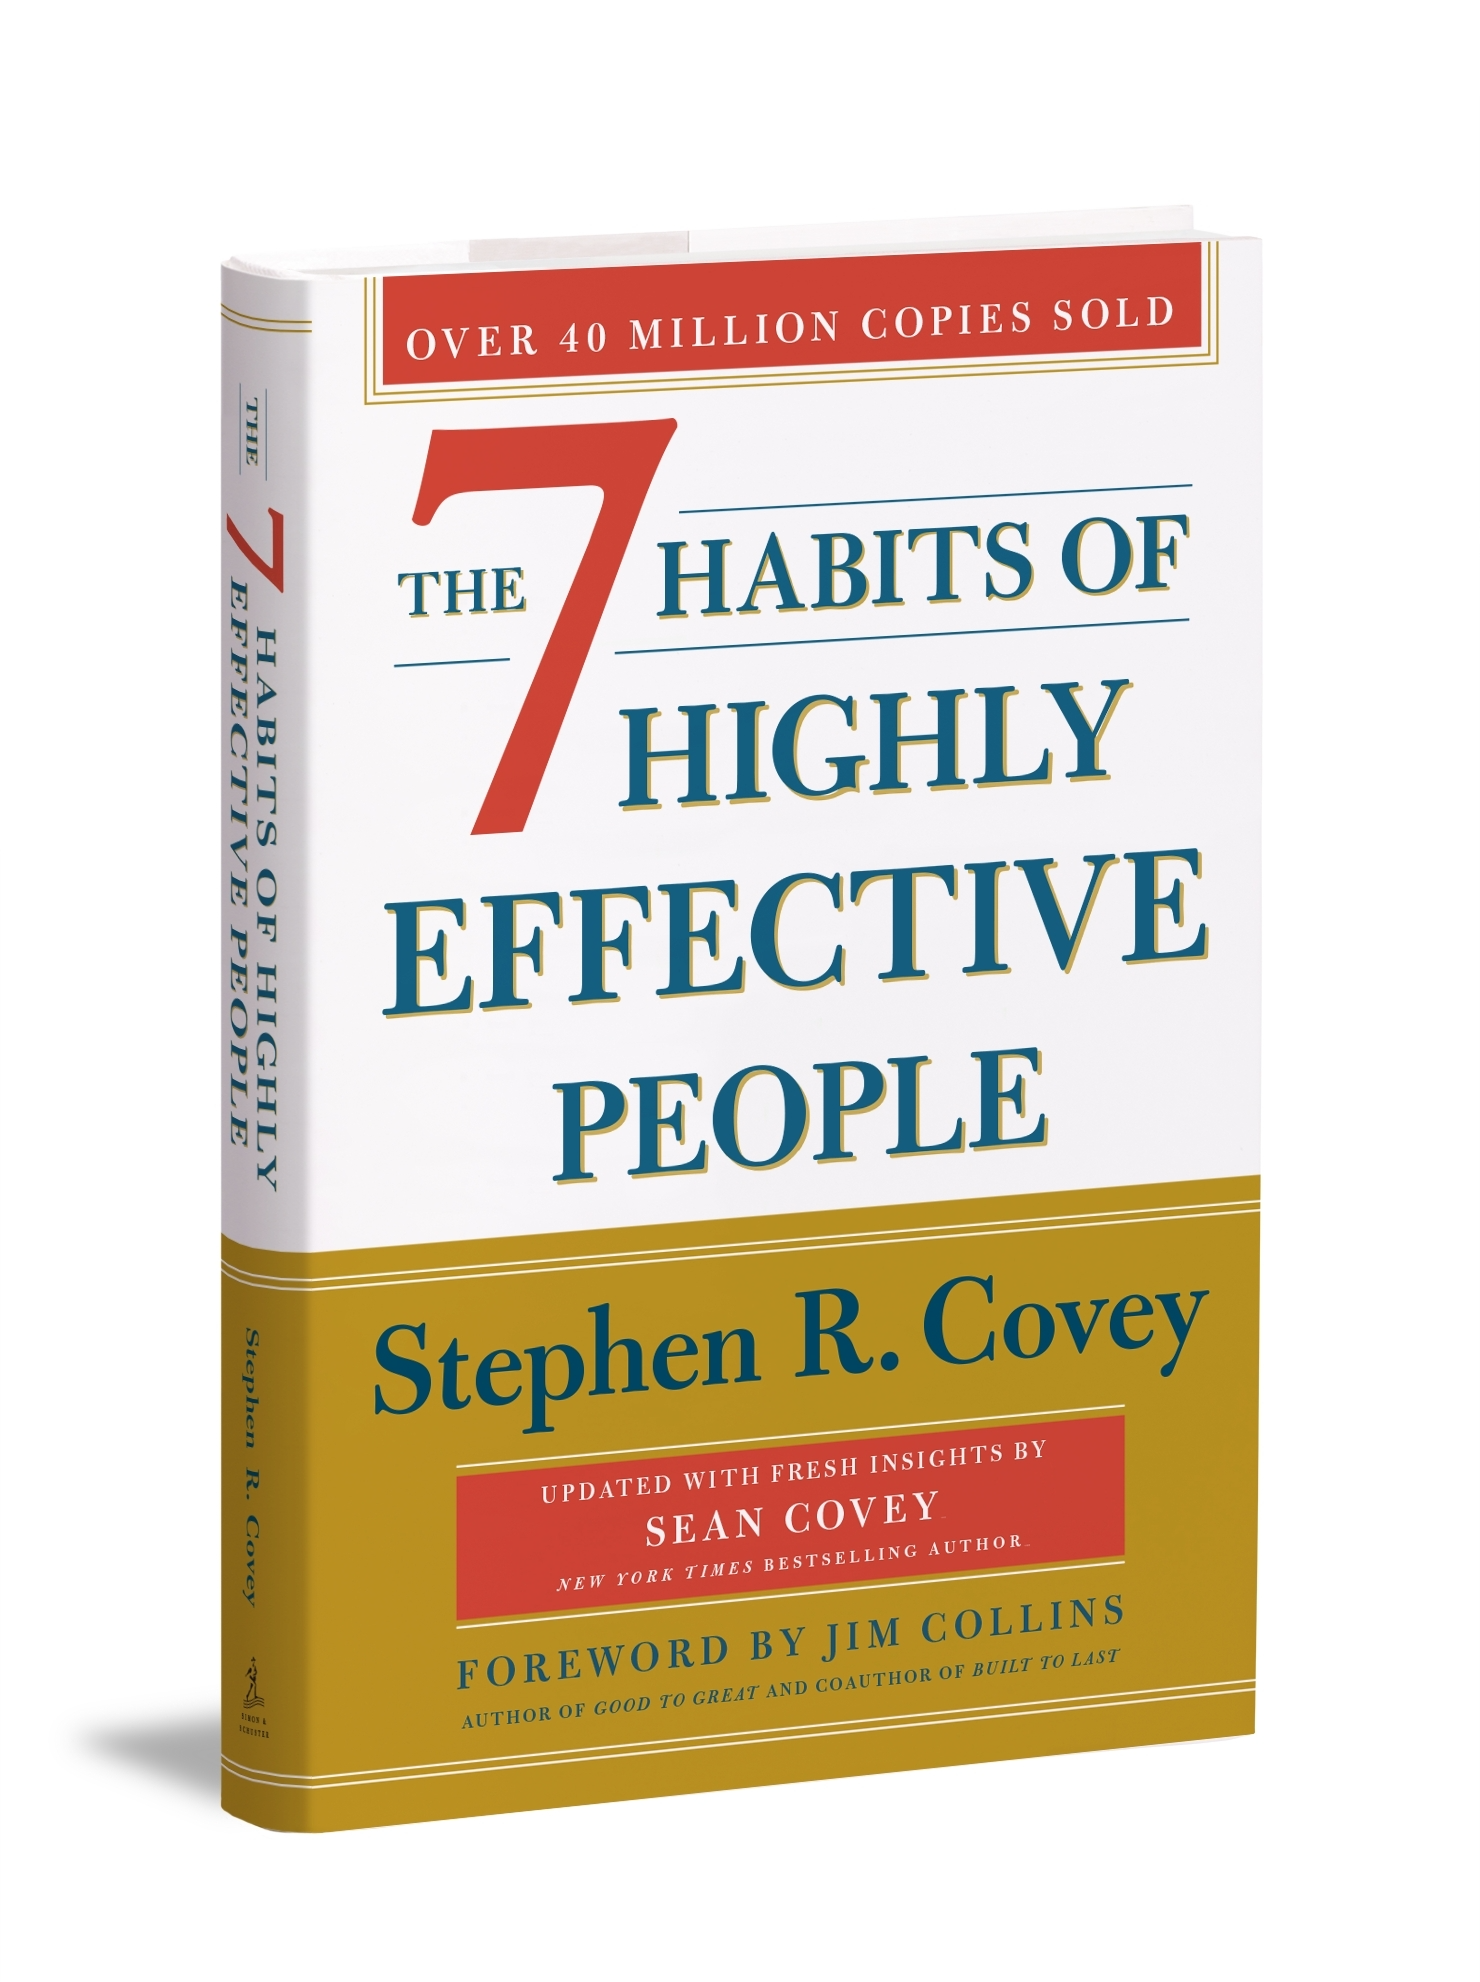 Stephen Covey's book 